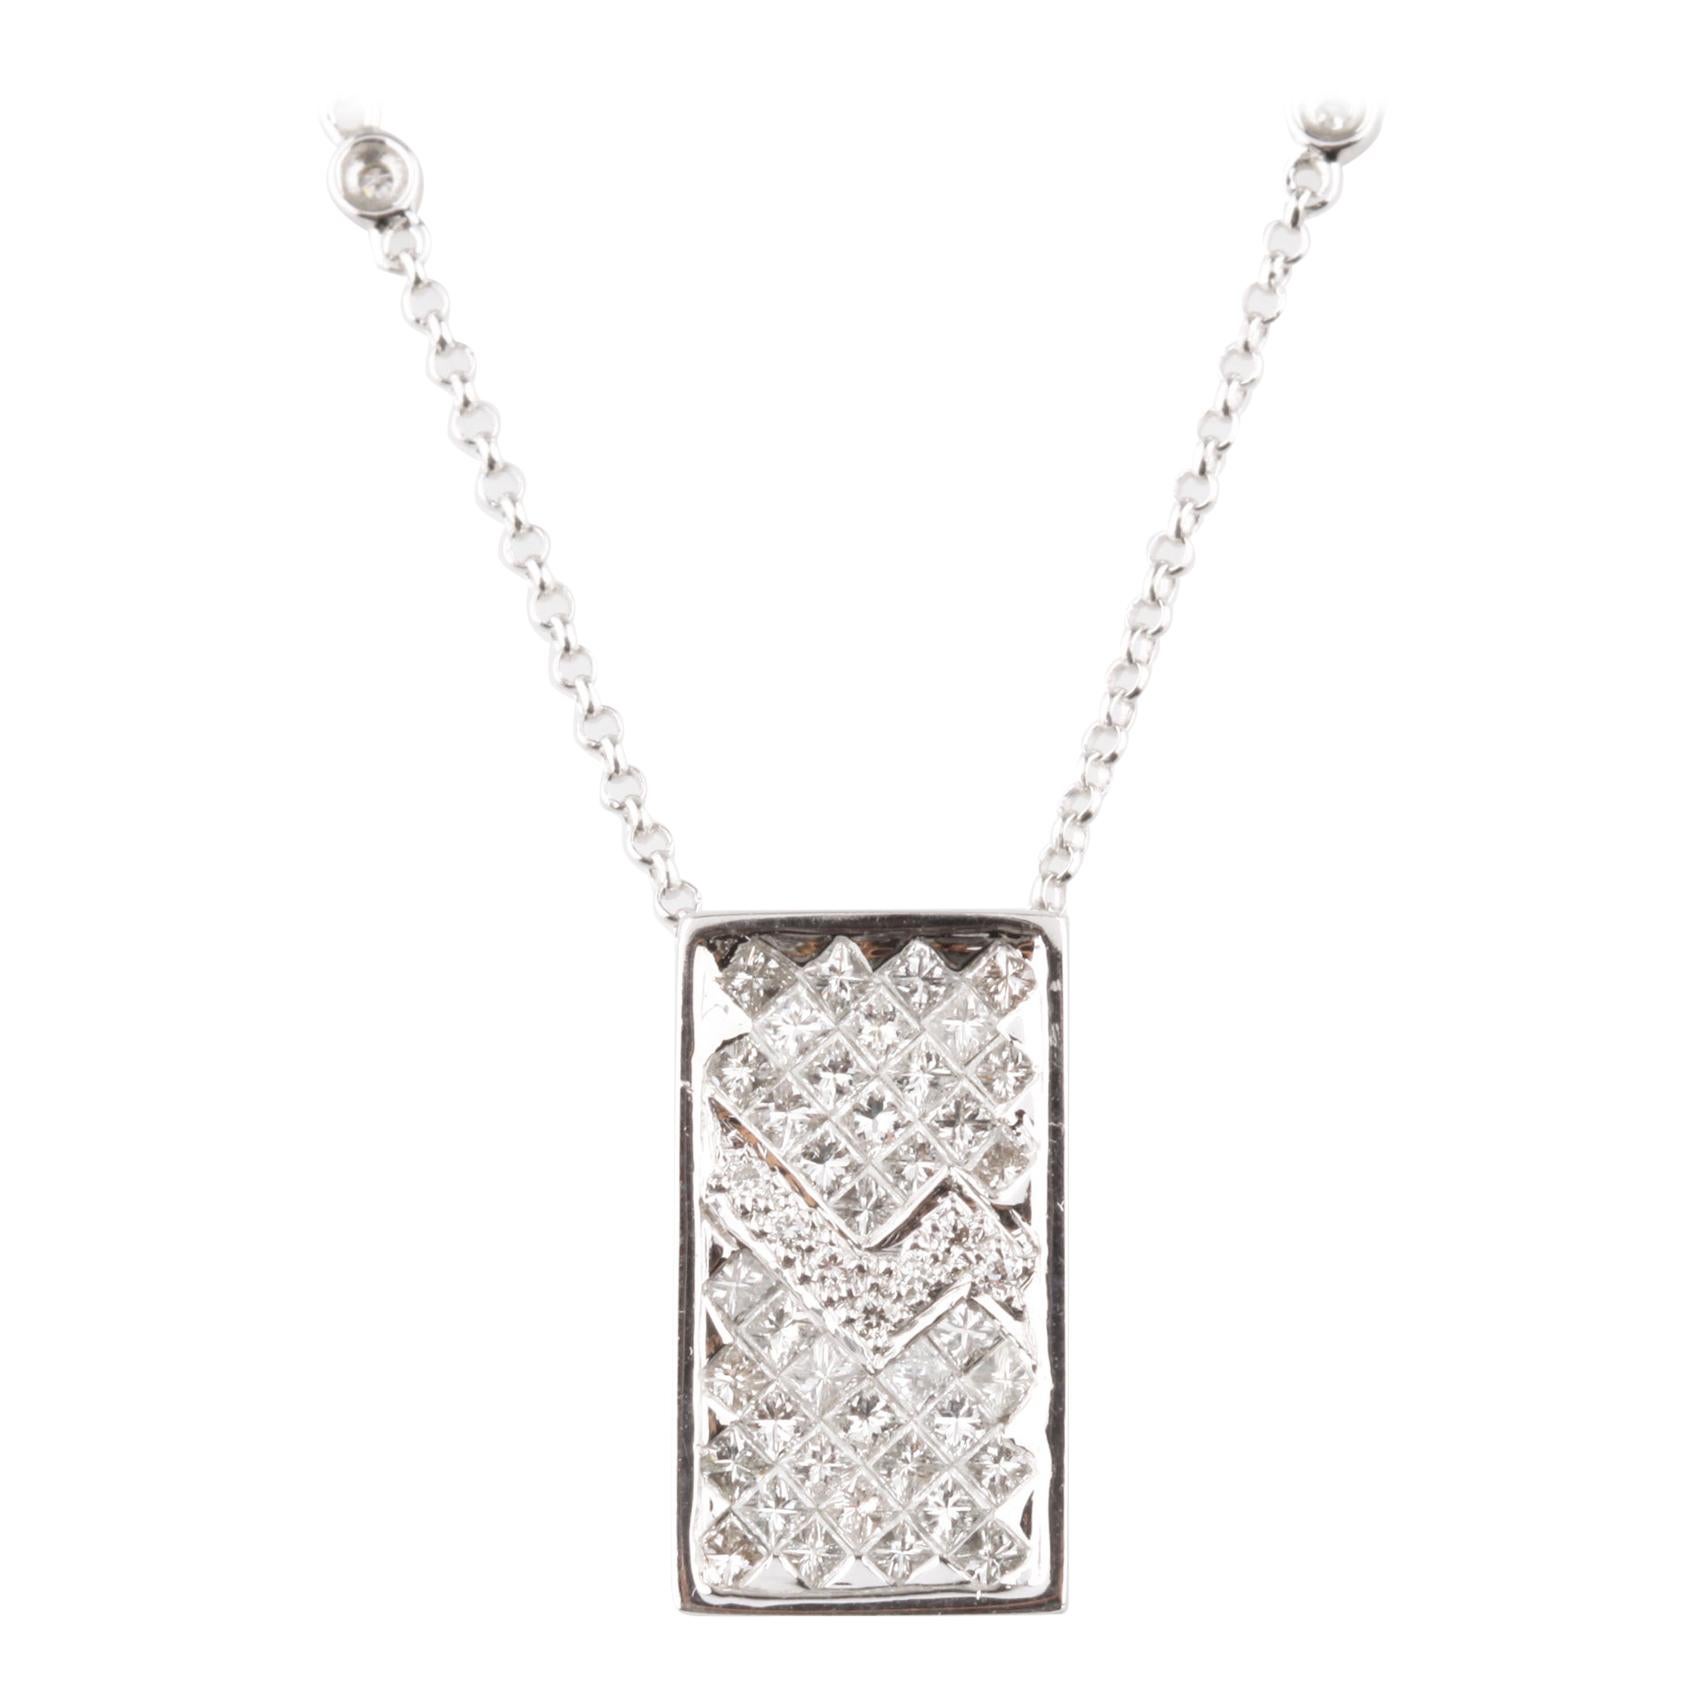 1.60 Carat Round Diamond Plaque Pendant in White Gold with Chain